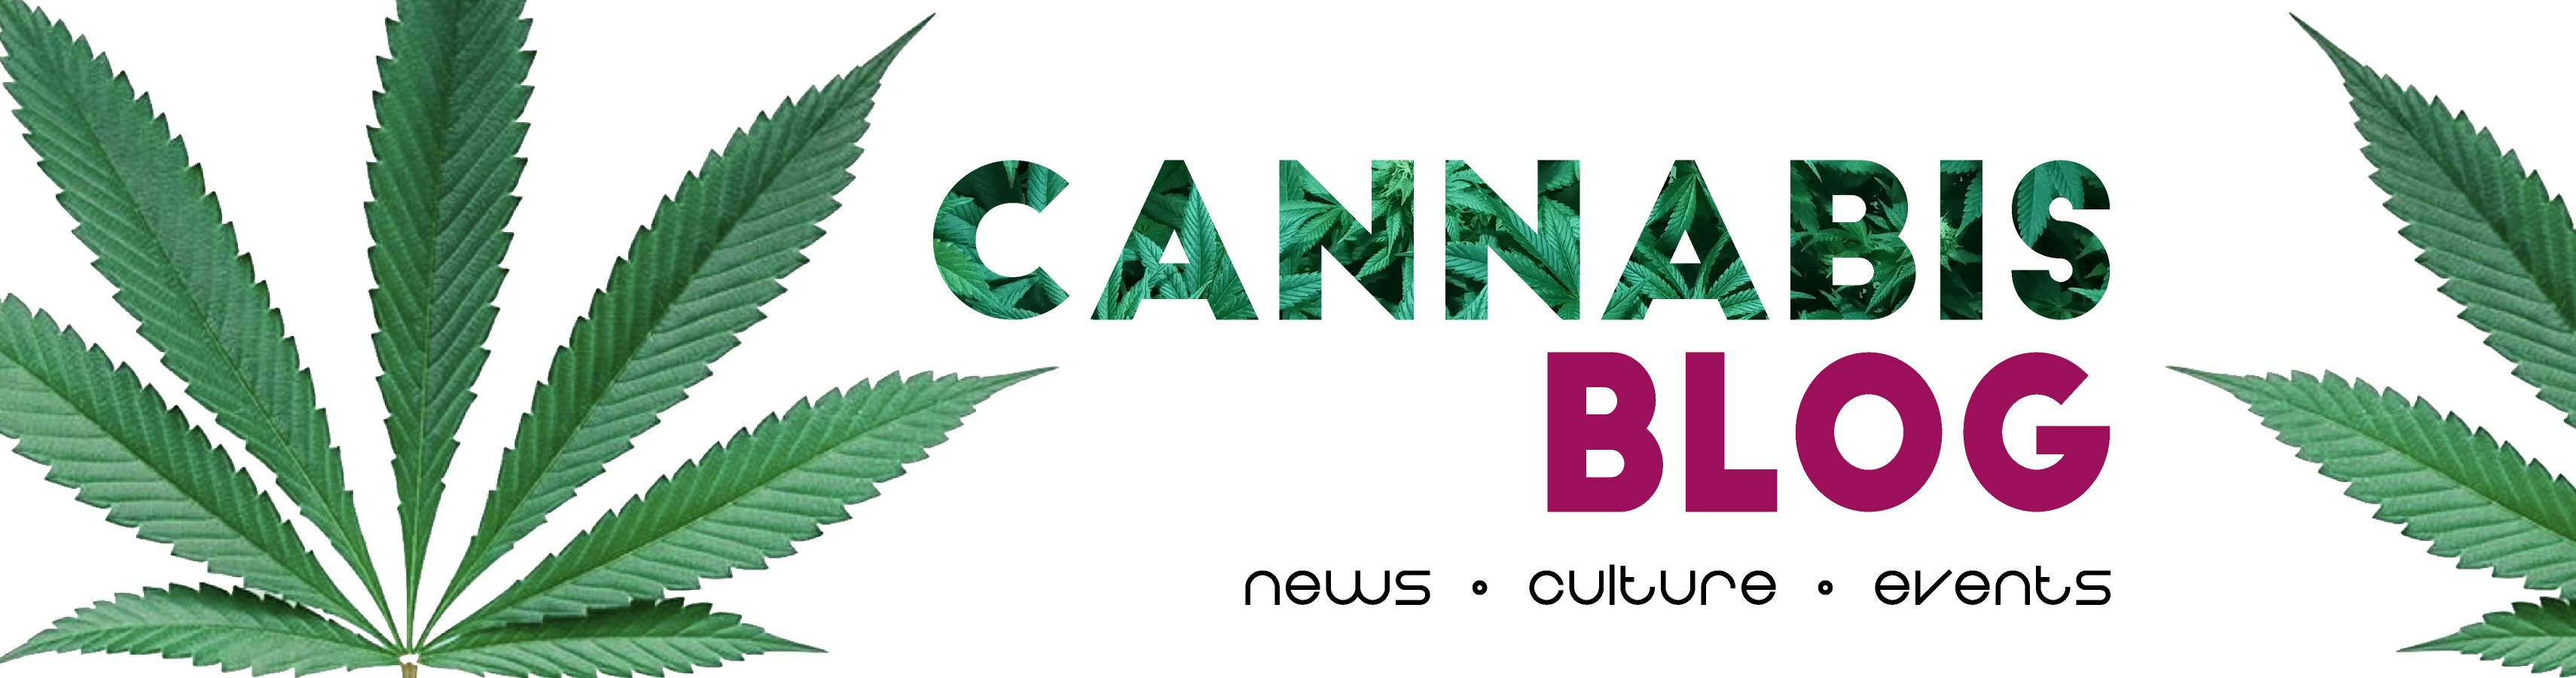 Committee Blog: Trust In Cannabis - Why It Matters More Now Than Ever -